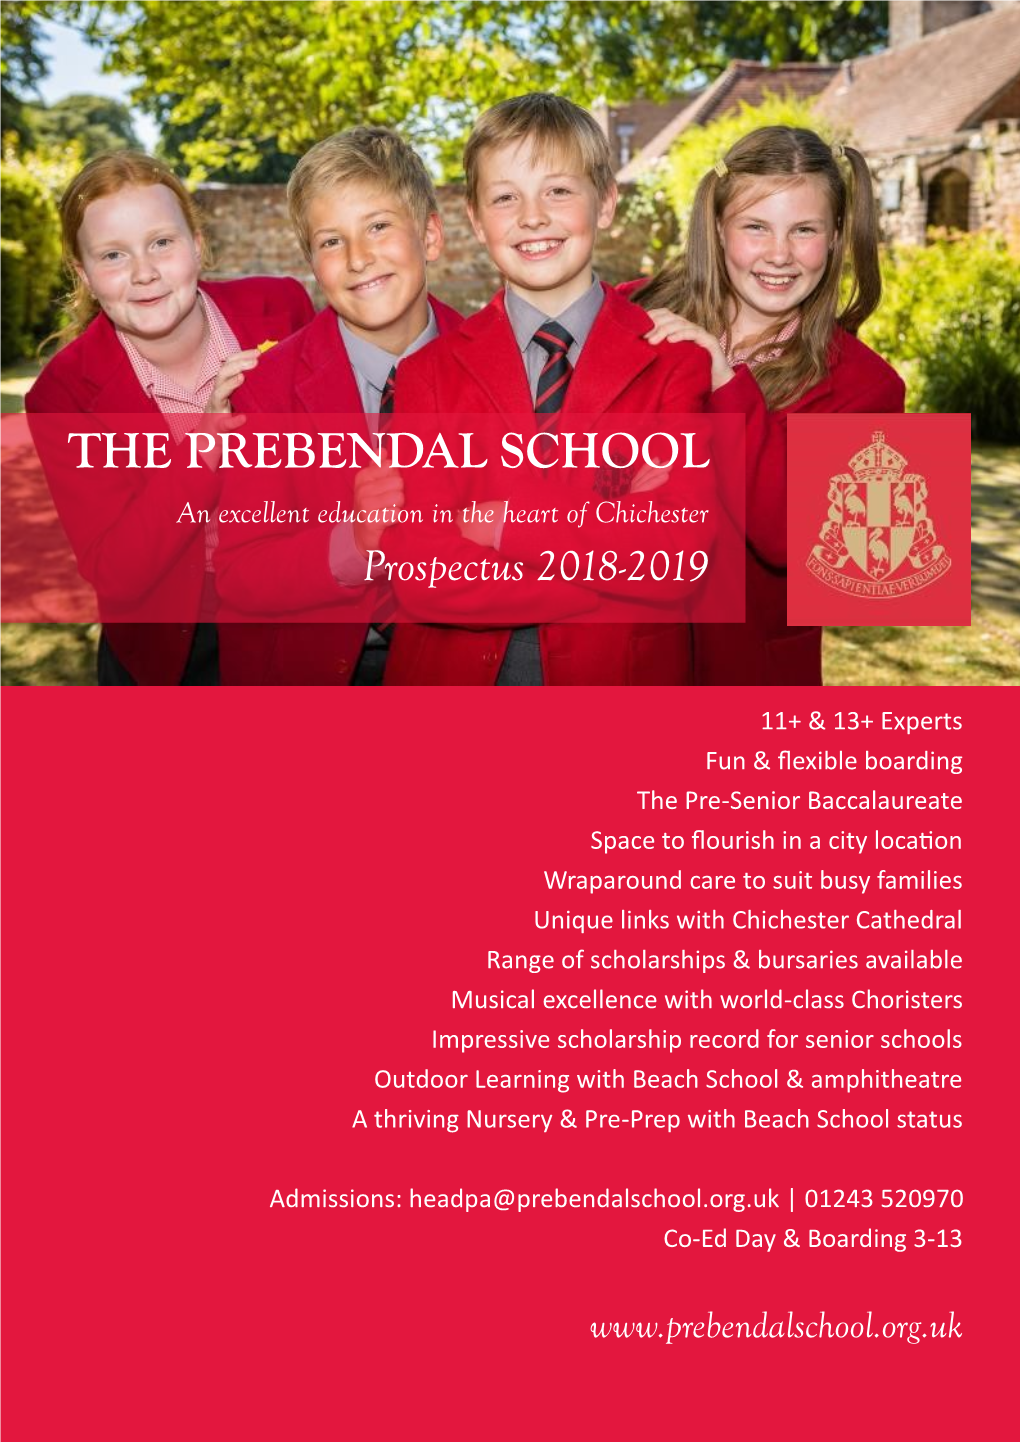 THE PREBENDAL SCHOOL an Excellent Education in the Heart of Chichester Prospectus 2018-2019